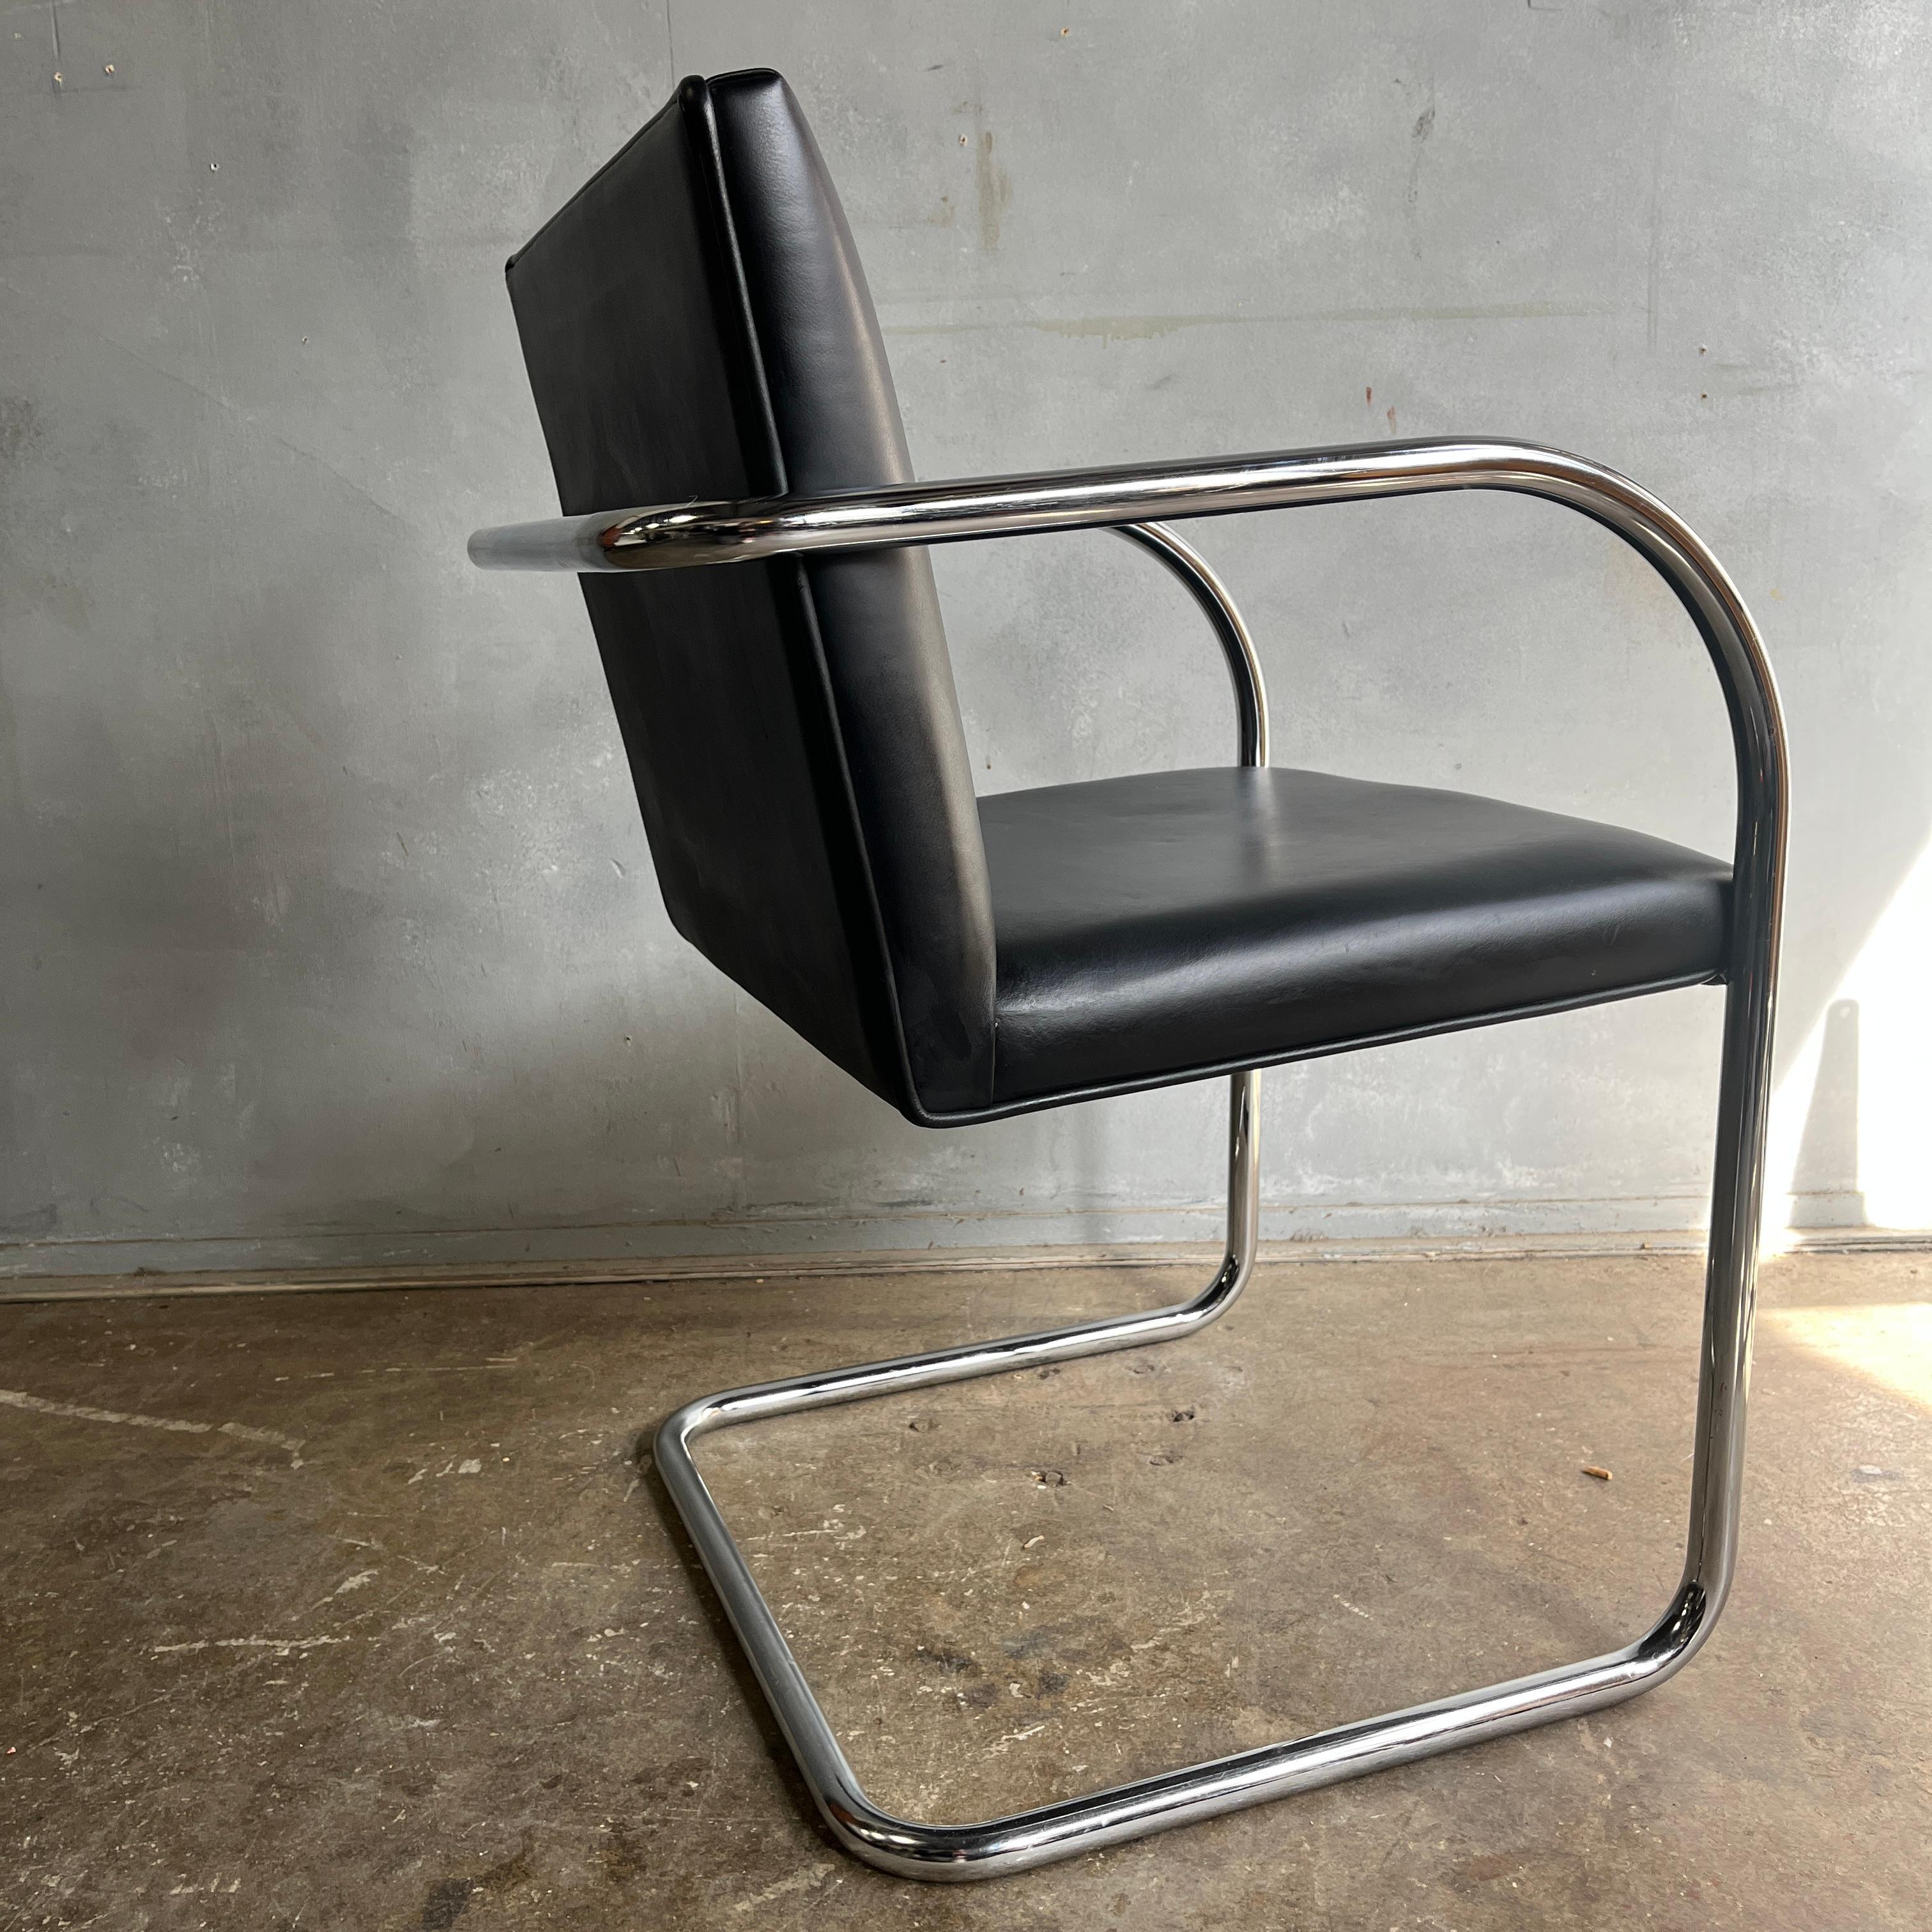 Beautiful vintage condition brno chair having a nice uniform patina throughout. Ready for use

Labeled Knoll on the underside.